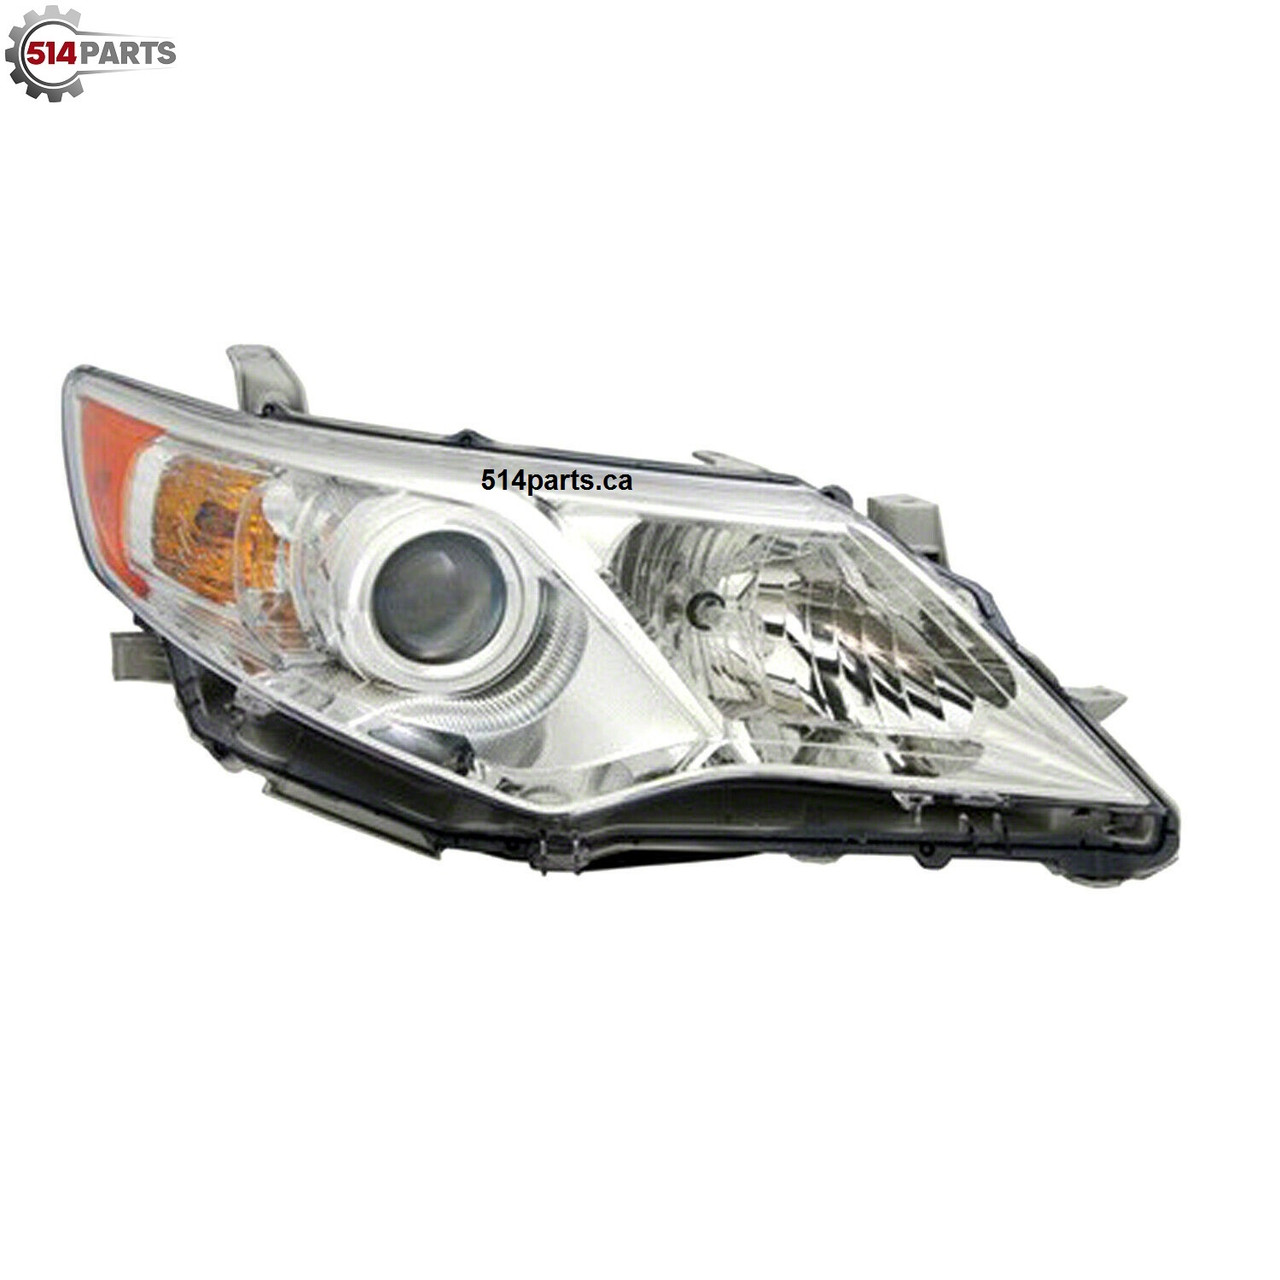 2012 - 2014 TOYOTA CAMRY and CAMRY HYBRID L/LE/XLE Models HEADLIGHTS High Quality - PHARES AVANT Haute Qualite